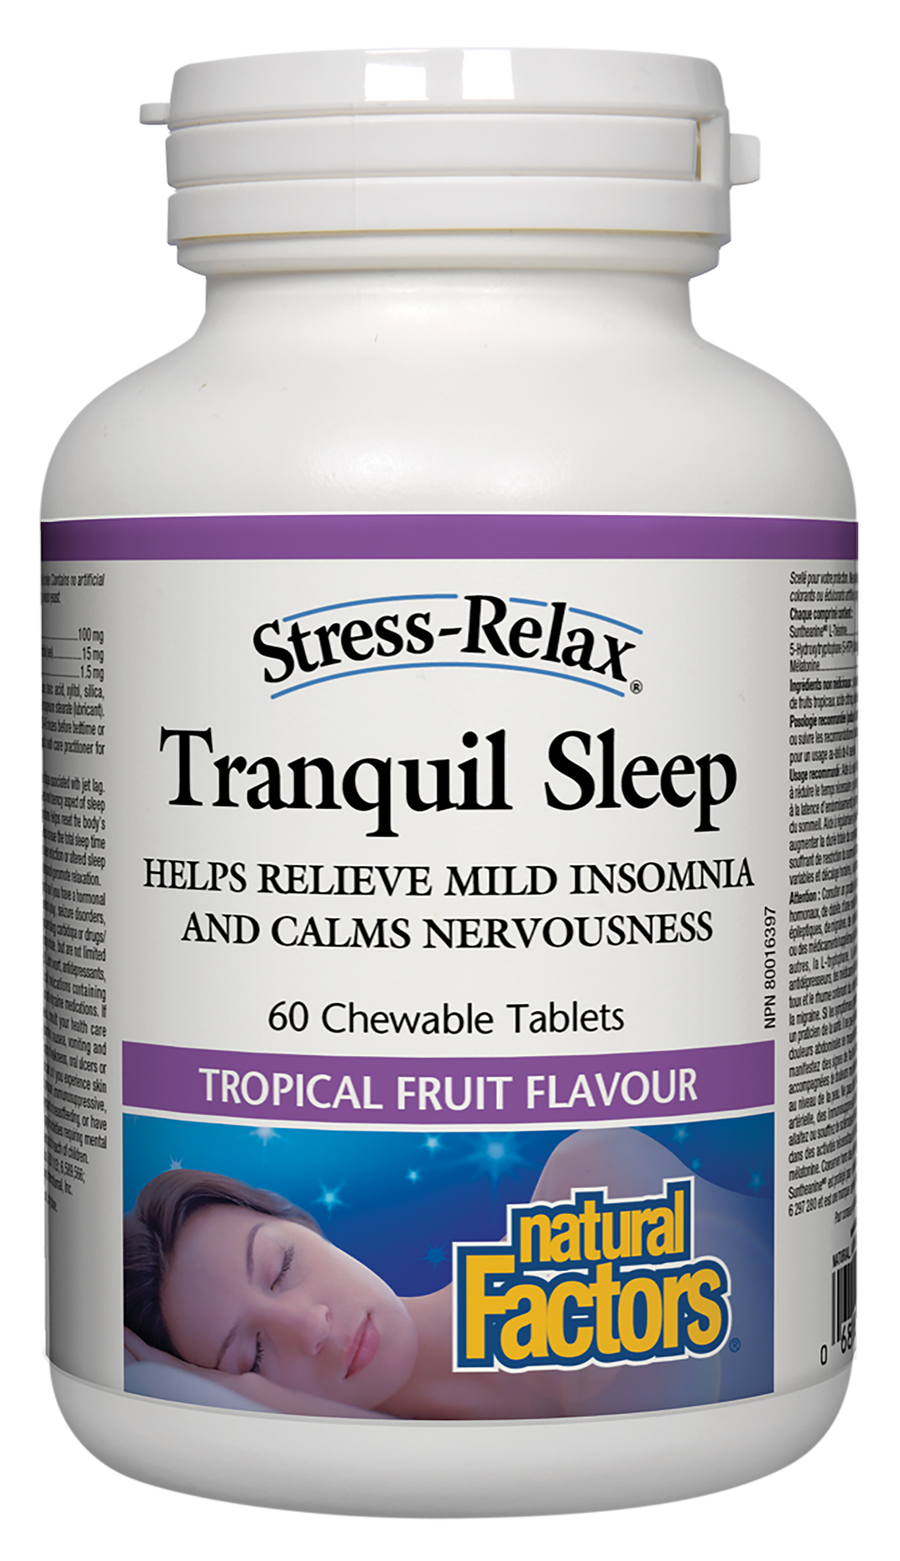 Natural Factors Tranquil Sleep, Tropical Fruit Flavour, Stress-Relax 60 Chewable Tablets